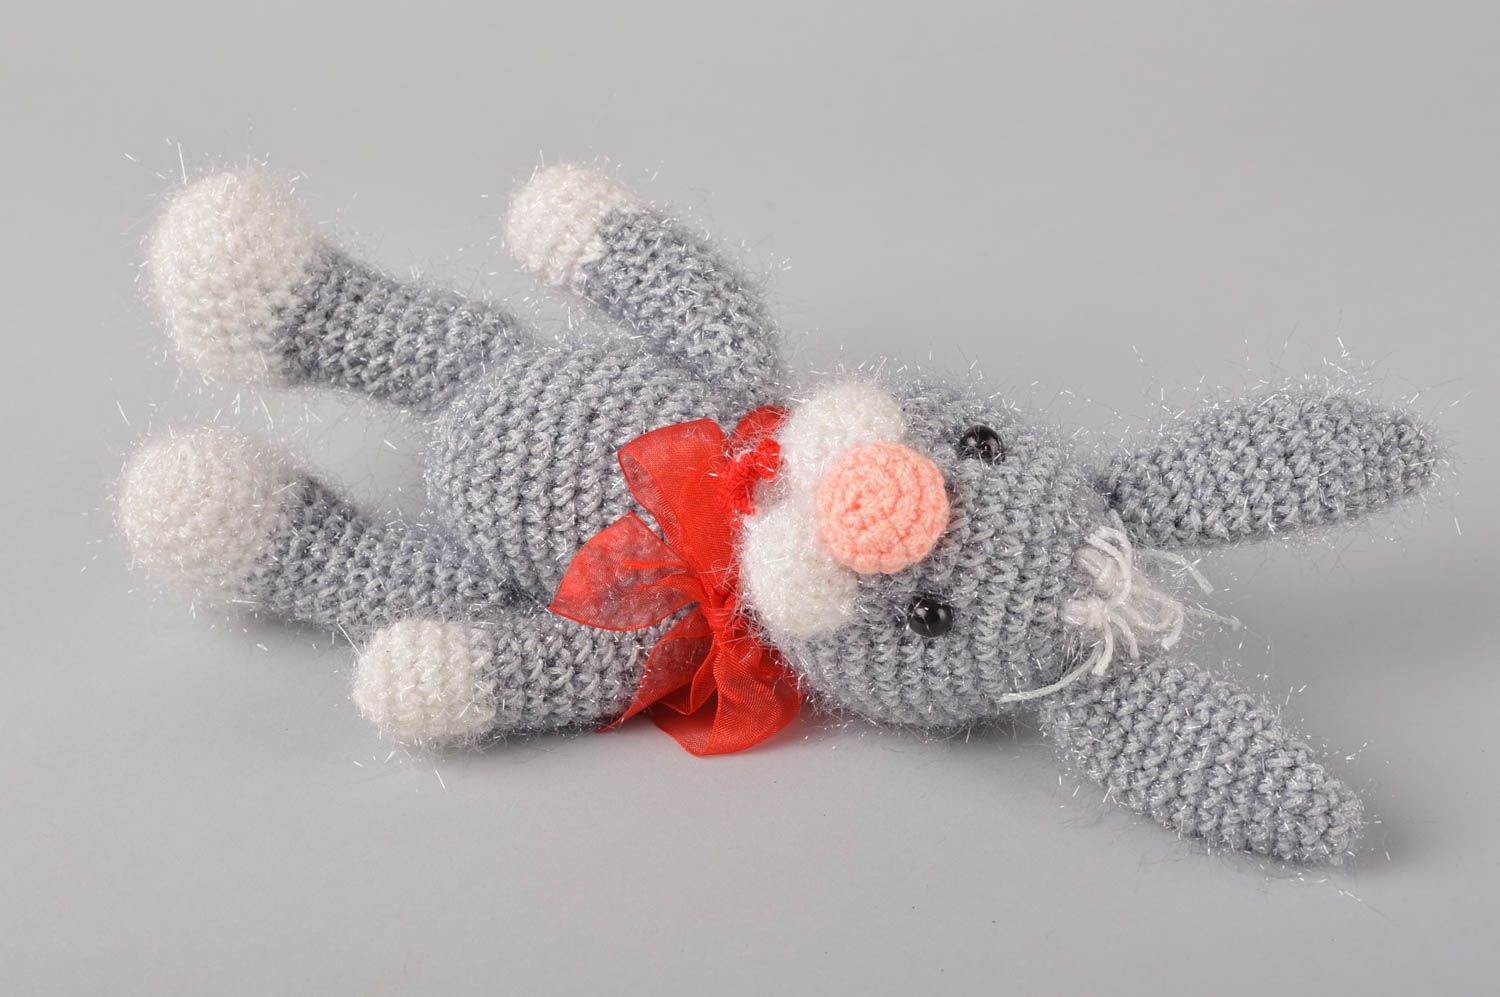 Handmade toy designer toy unusual toy decor ideas gift for baby crocheted toy photo 5